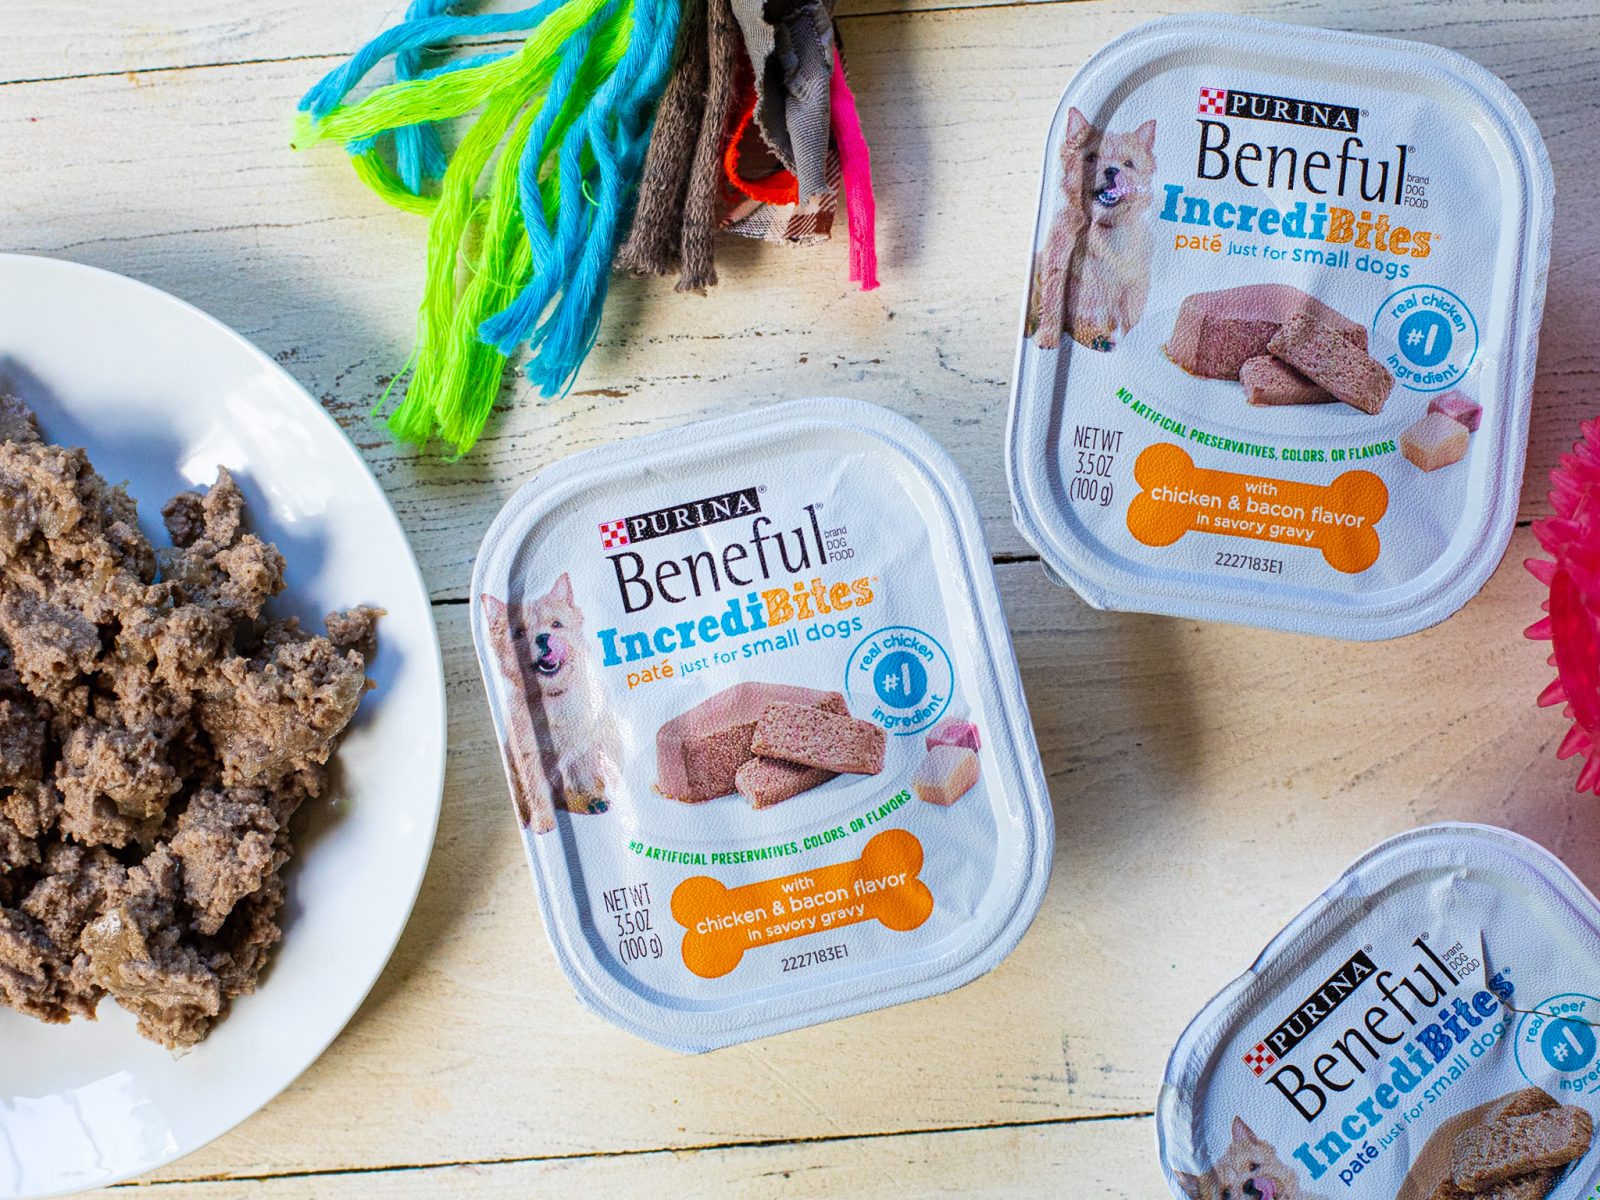 Get The Containers Of Purina Beneful IncrediBites Wet Dog Food For Just $1 At Kroger